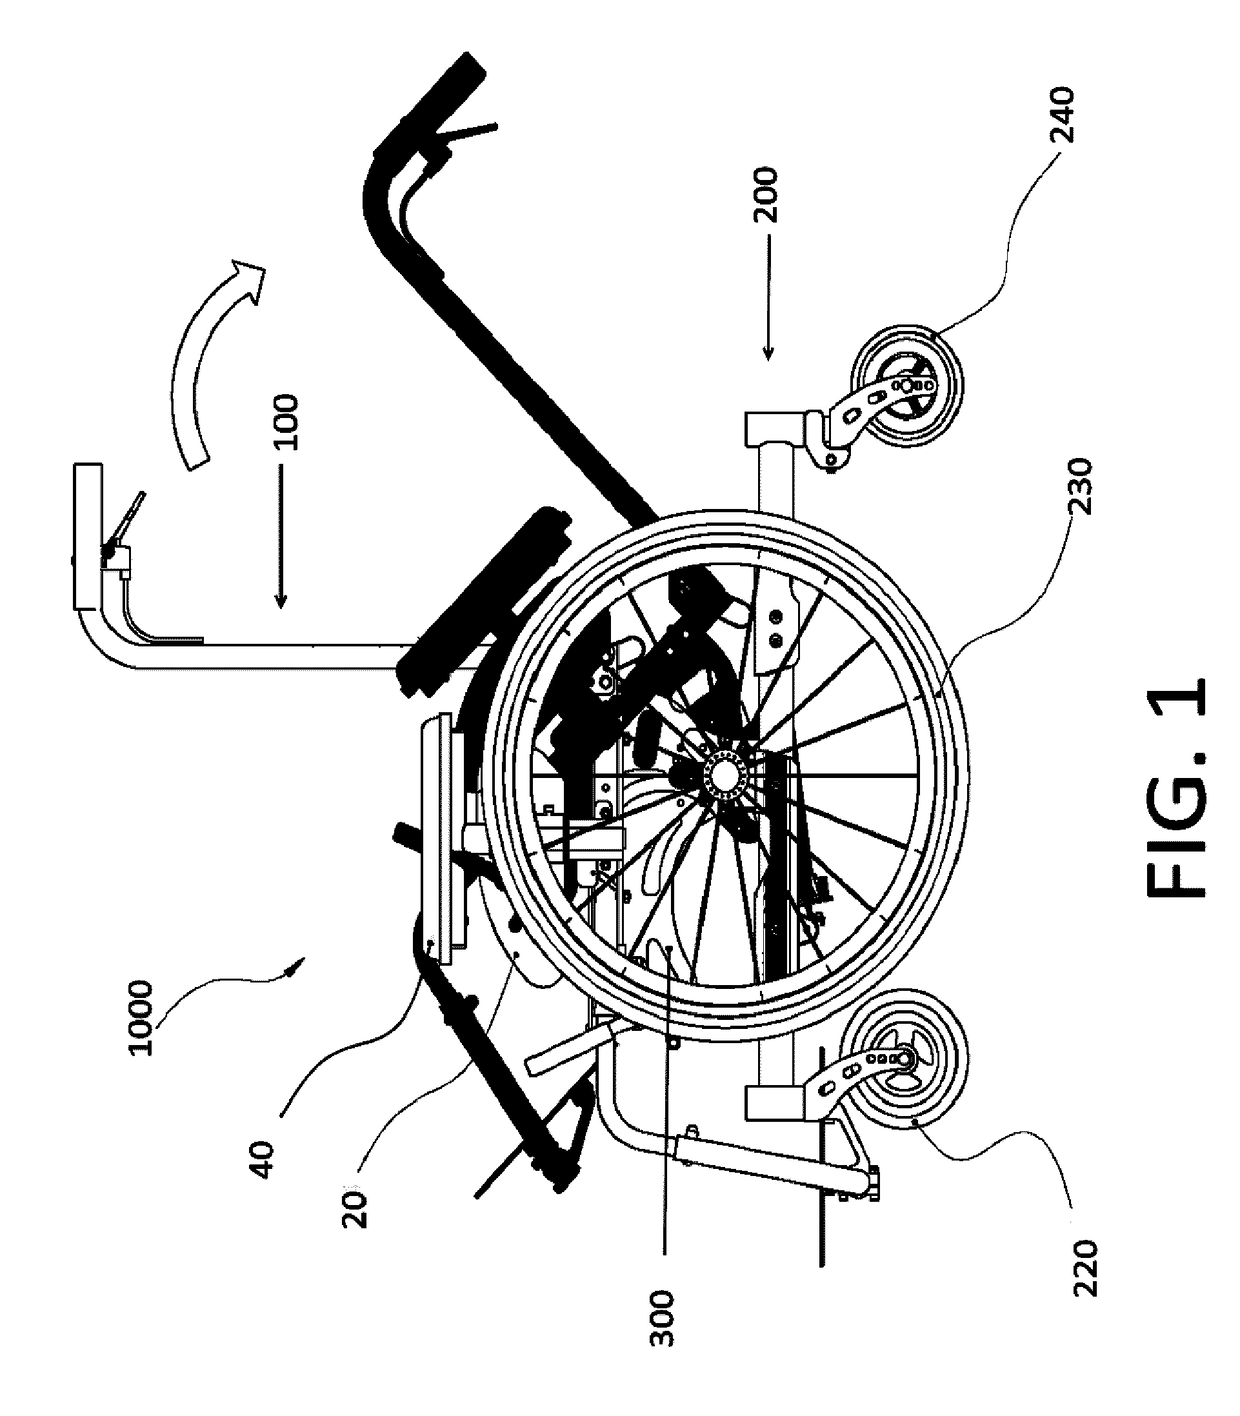 Mid-wheel tilt-in-space manual wheelchair with constant shoulder position